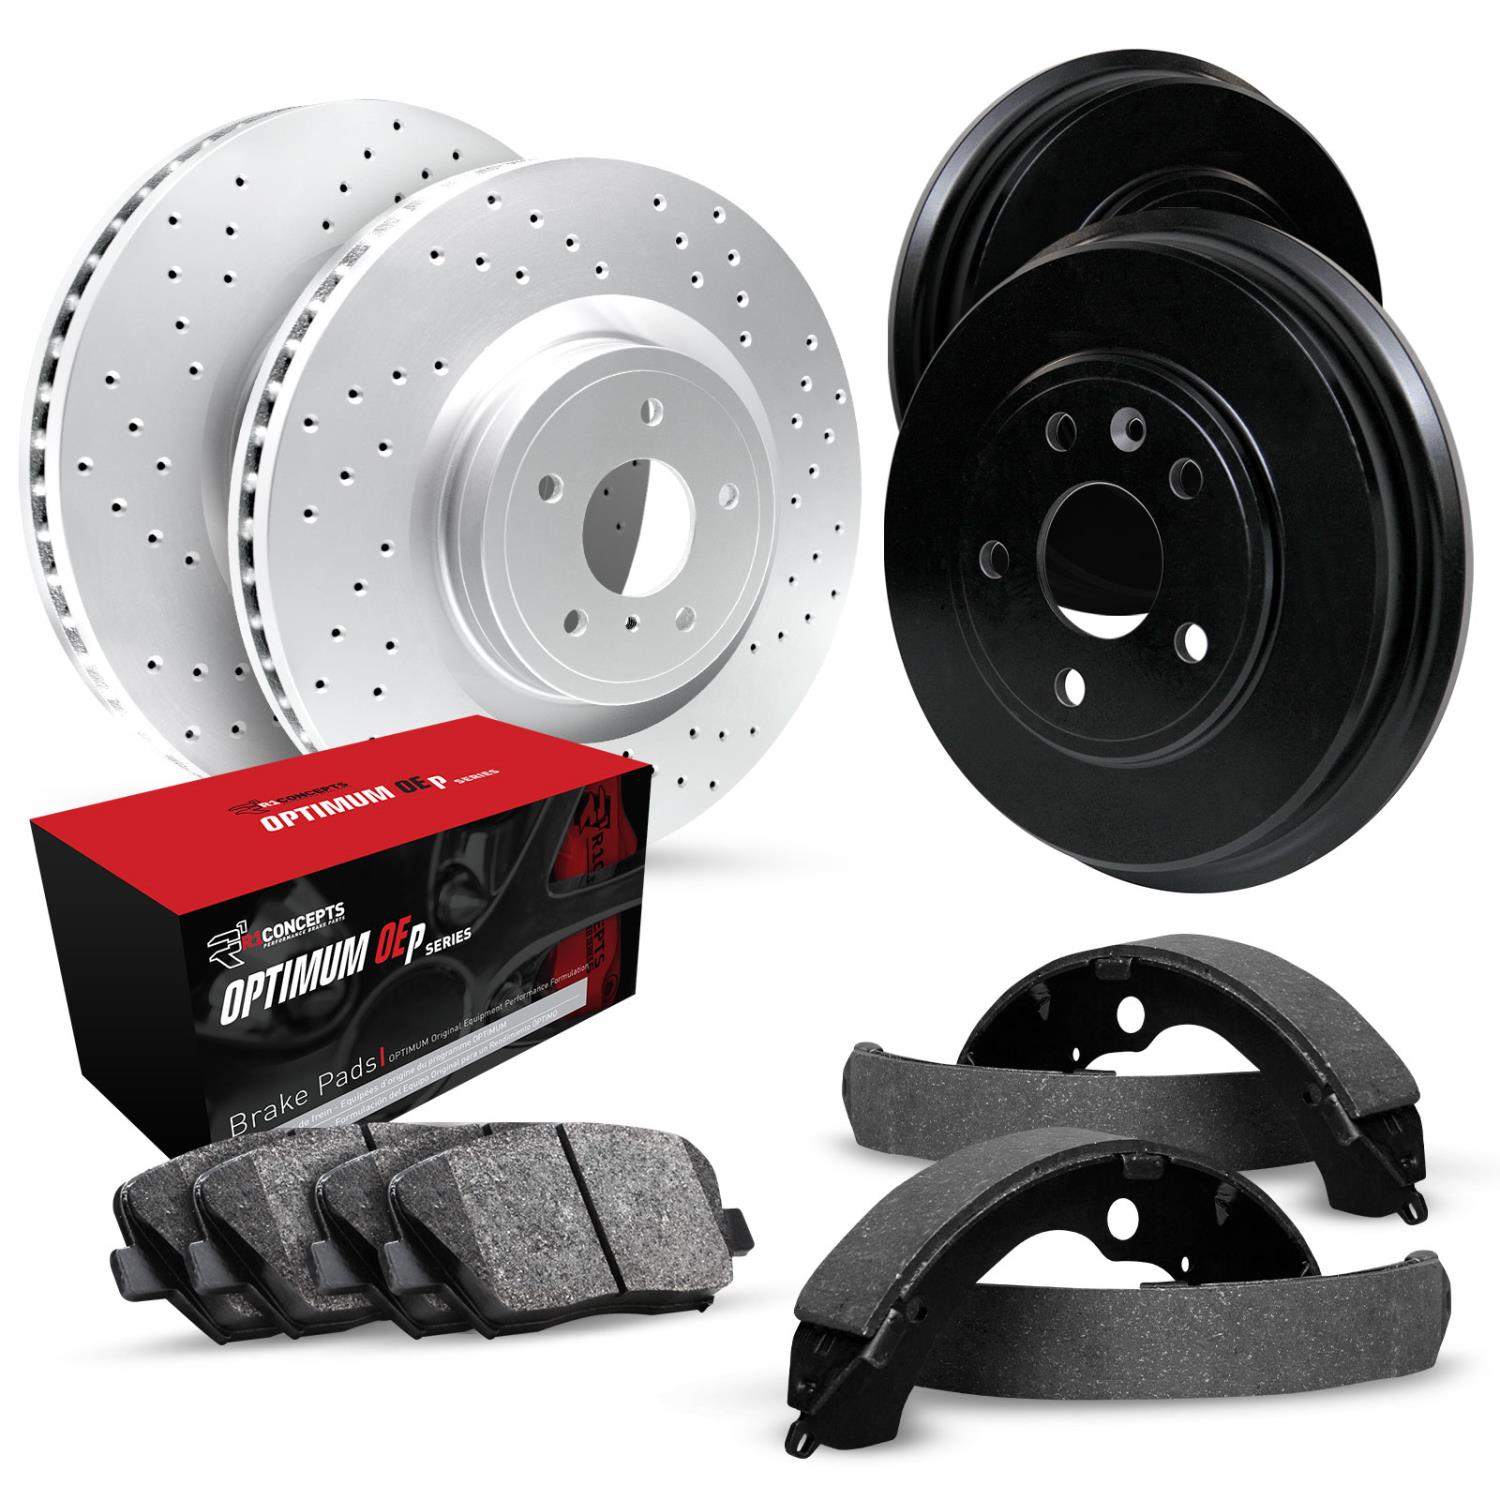 GEO-Carbon Drilled Brake Rotor & Drum Set w/Optimum OE Pads & Shoes, 1988-1995 Infiniti/Nissan, Position: Front & Rear